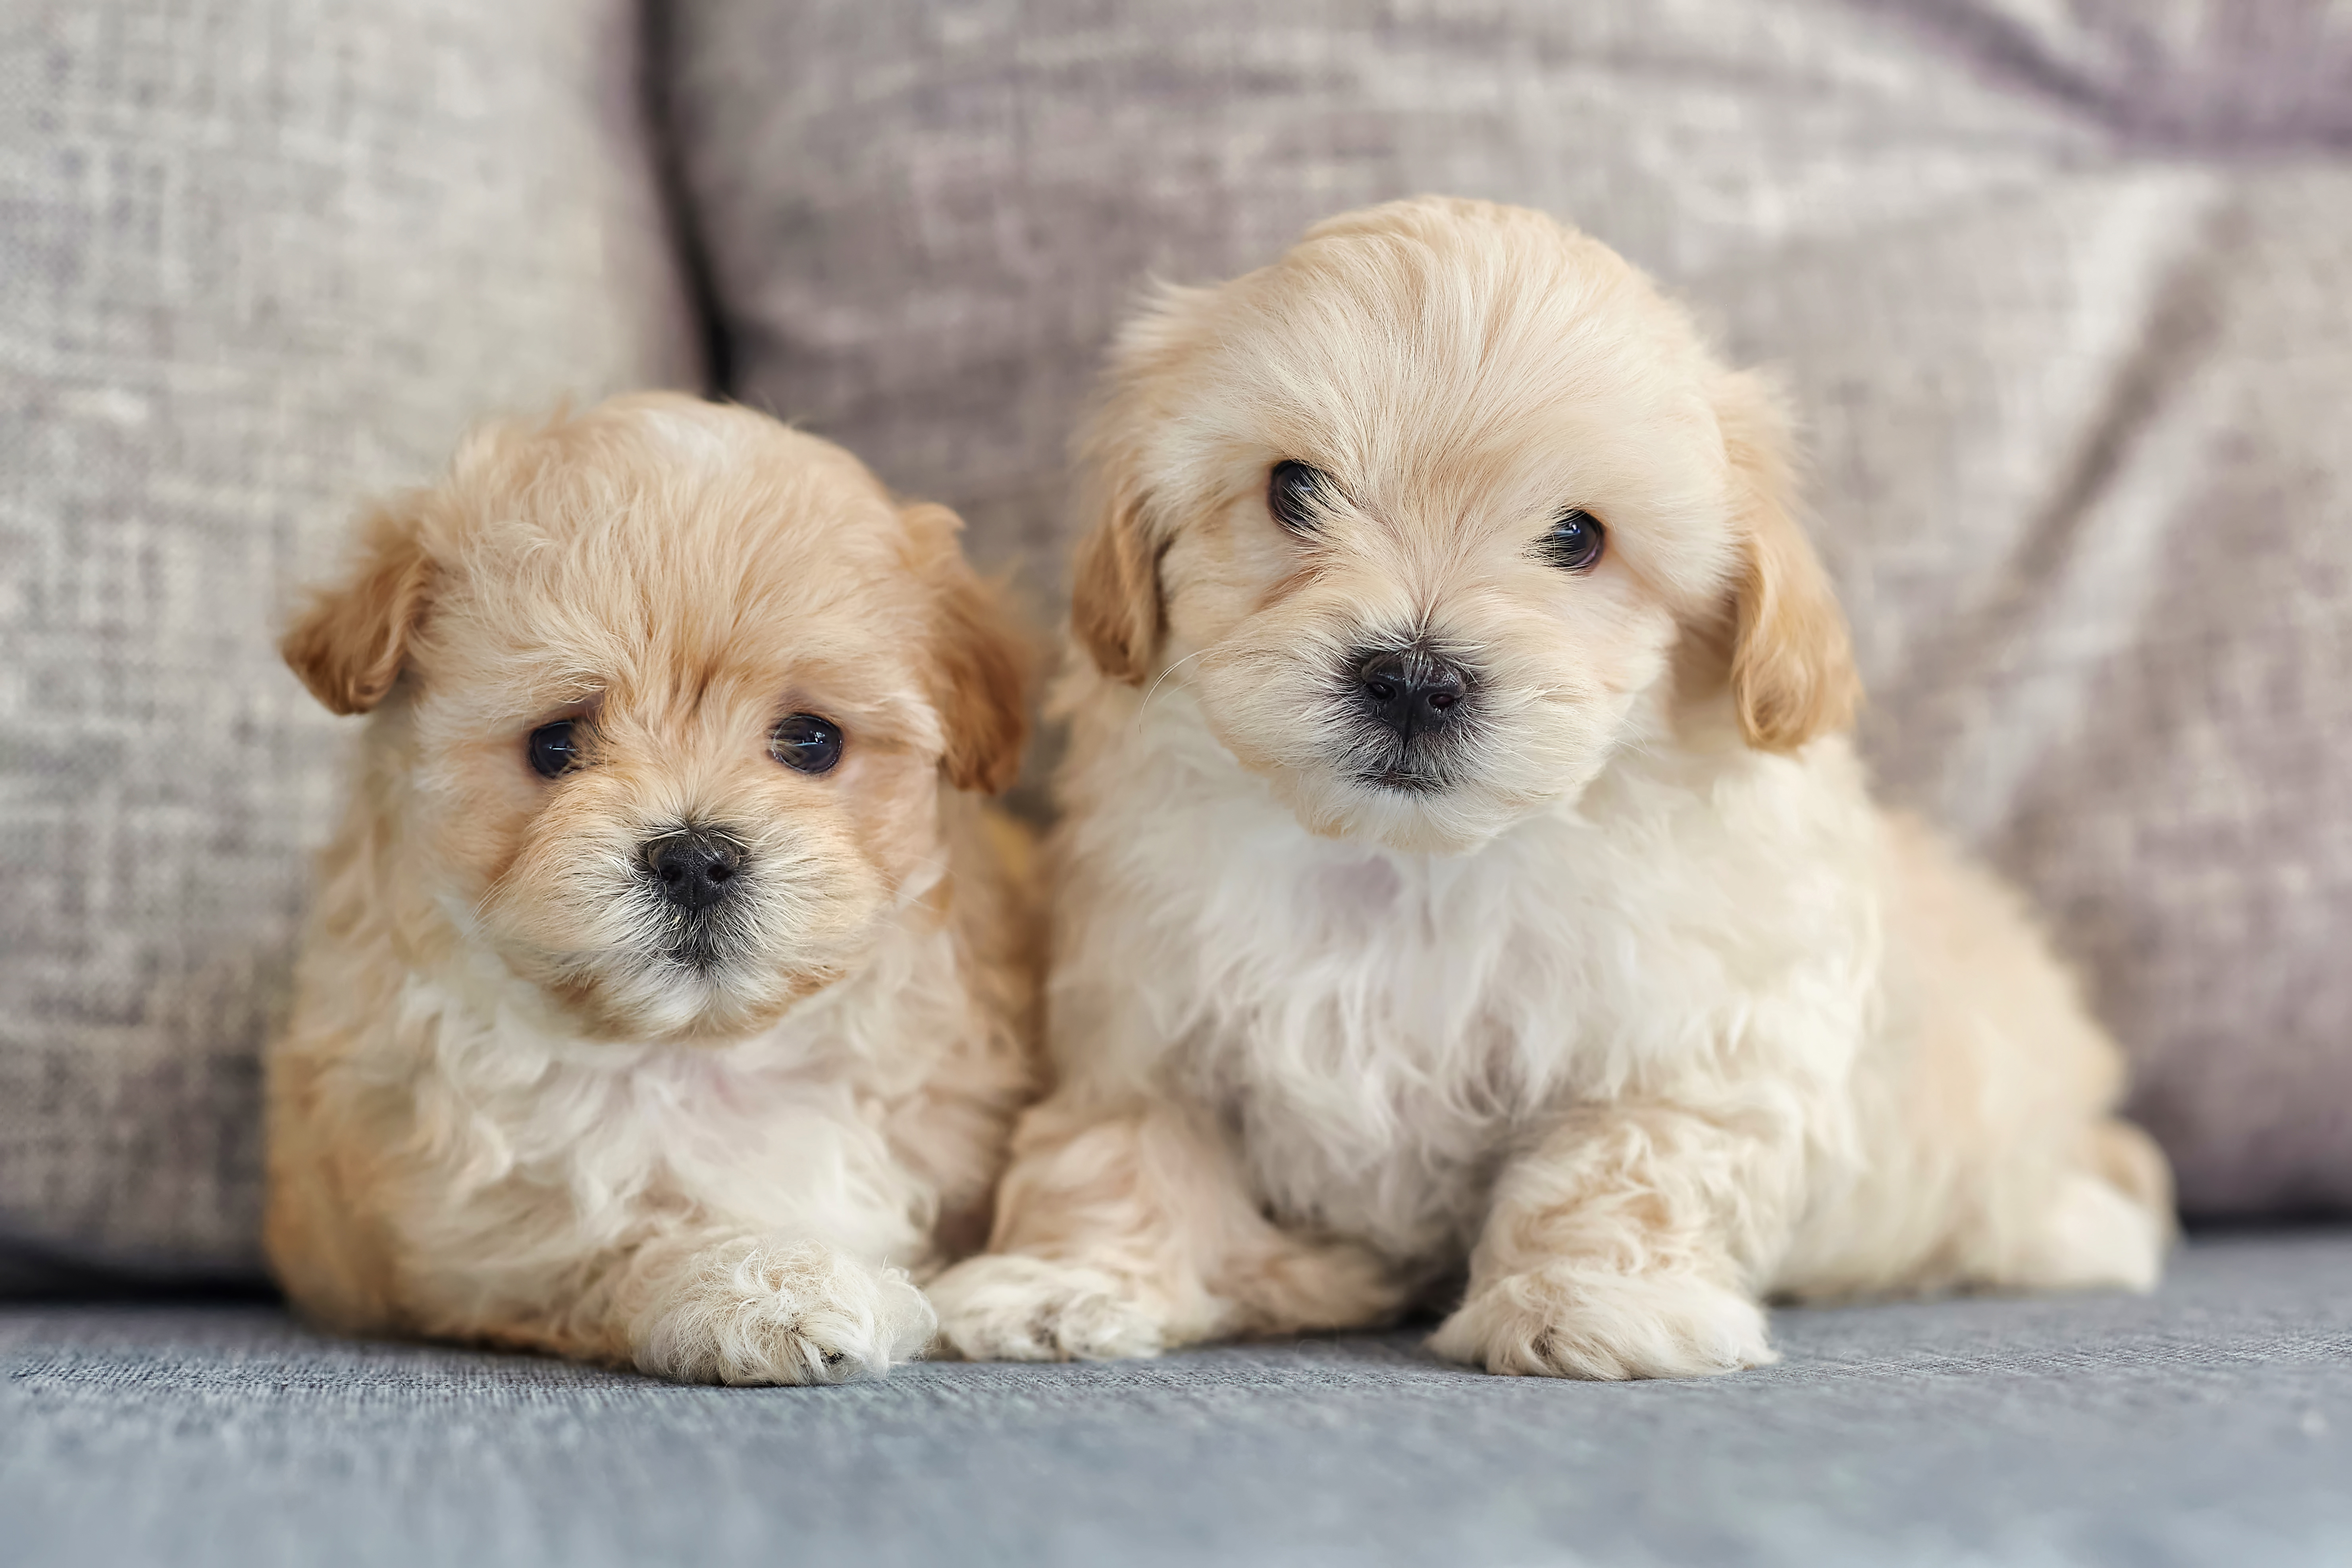 Maltese vs. Coton de Tulear: How to Tell the Difference